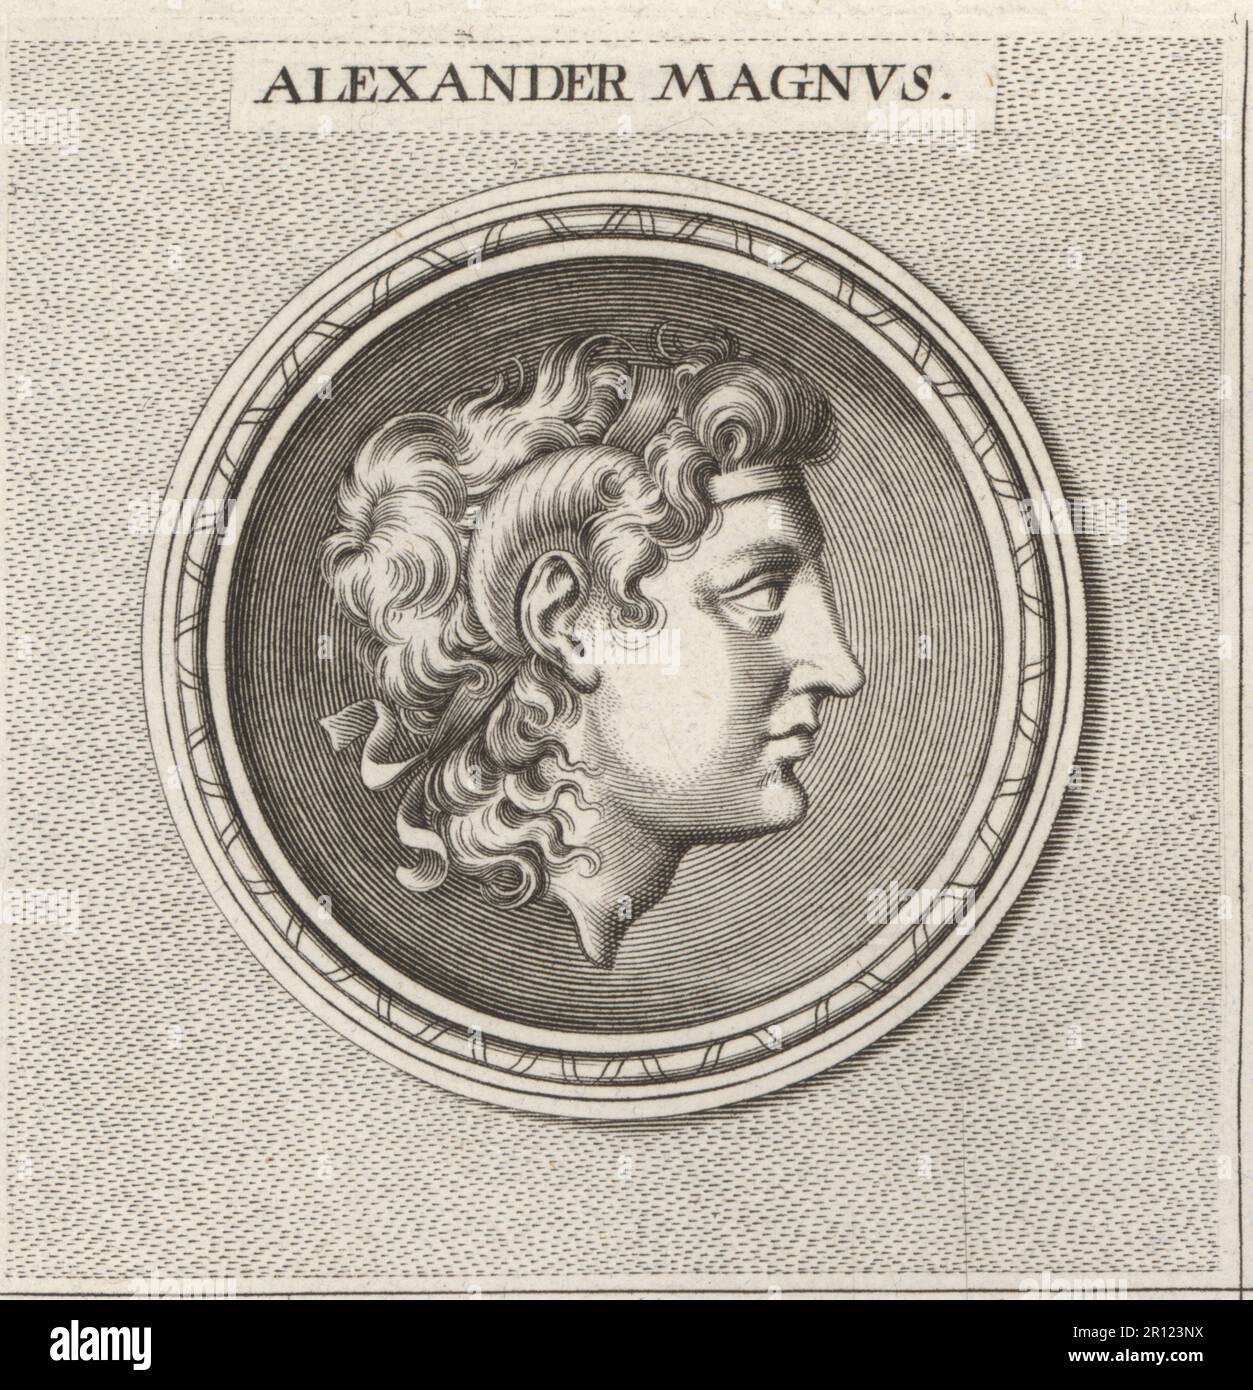 Alexander III of Macedon or Alexander the Great, king of the ancient Greek kingdom of Macedon, 356-323 BC. Head of youth with diadem and horns of Ammon. Alexander Magnus. Copperplate engraving after an illustration by Joachim von Sandrart from his L’Academia Todesca, della Architectura, Scultura & Pittura, oder Teutsche Academie, der Edlen Bau- Bild- und Mahlerey-Kunste, German Academy of Architecture, Sculpture and Painting, Jacob von Sandrart, Nuremberg, 1675. Stock Photo